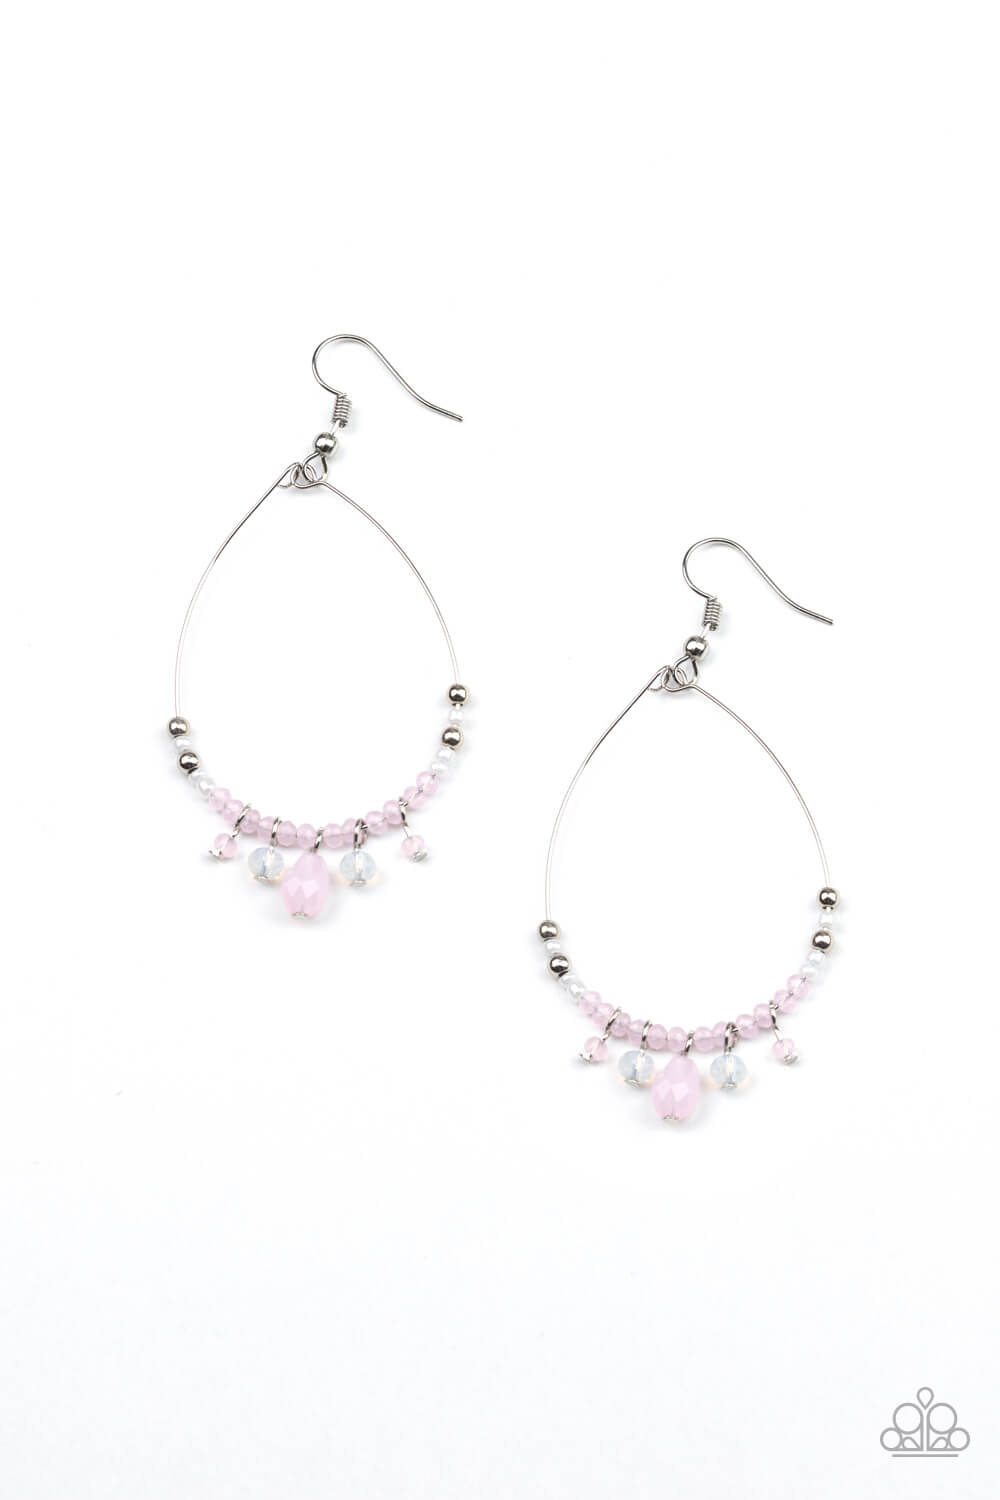 Exquisitely Ethereal - Pink Earrings - Princess Glam Shop